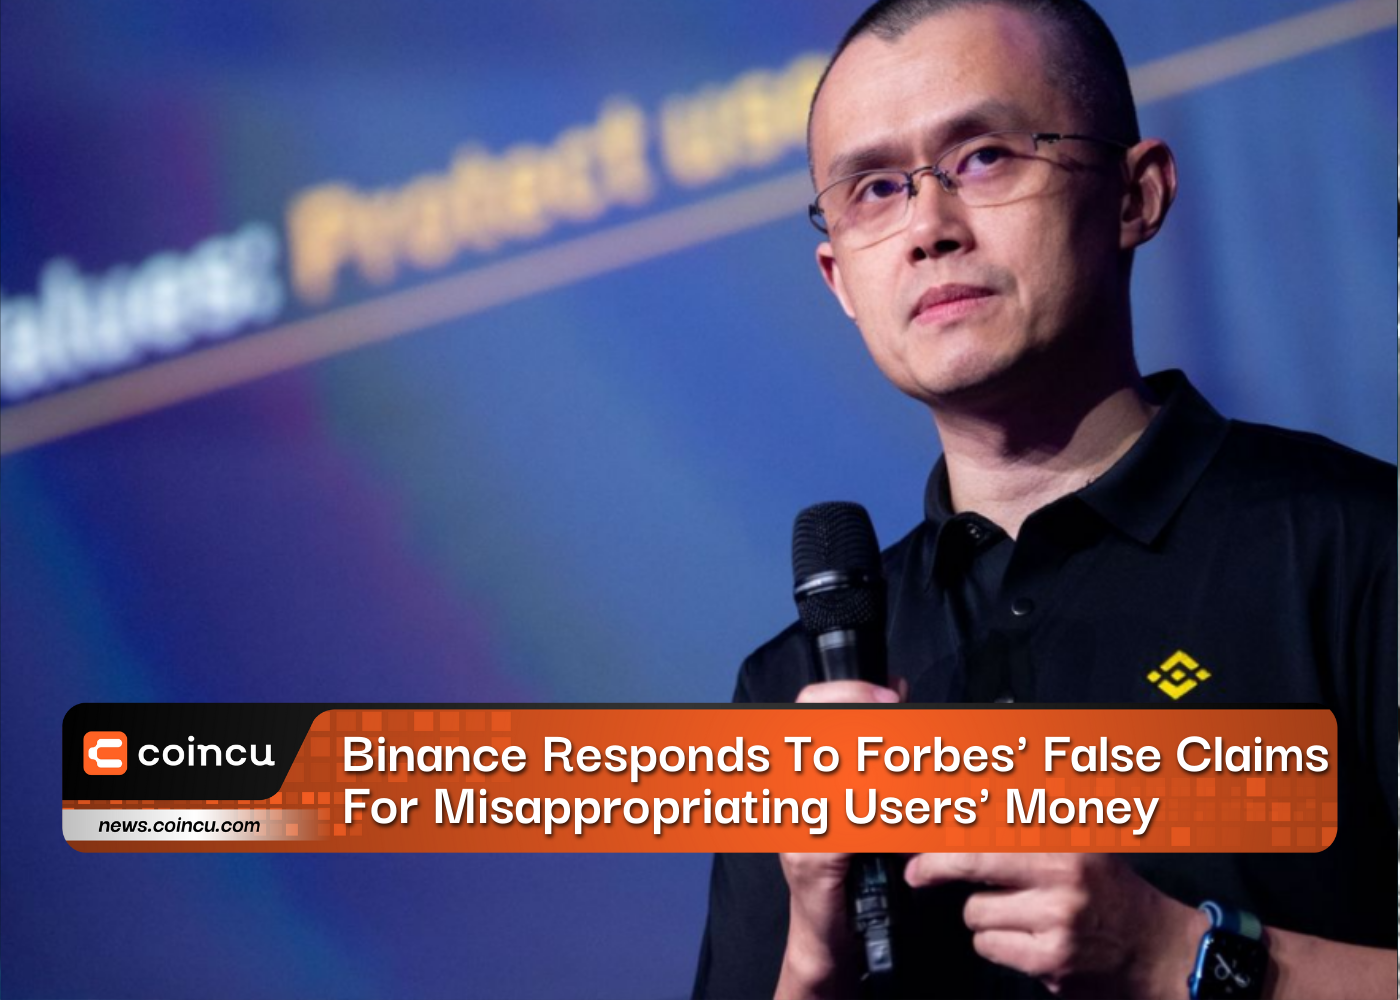 Binance Responds To Forbes' False Claims For Misappropriating Users' Money